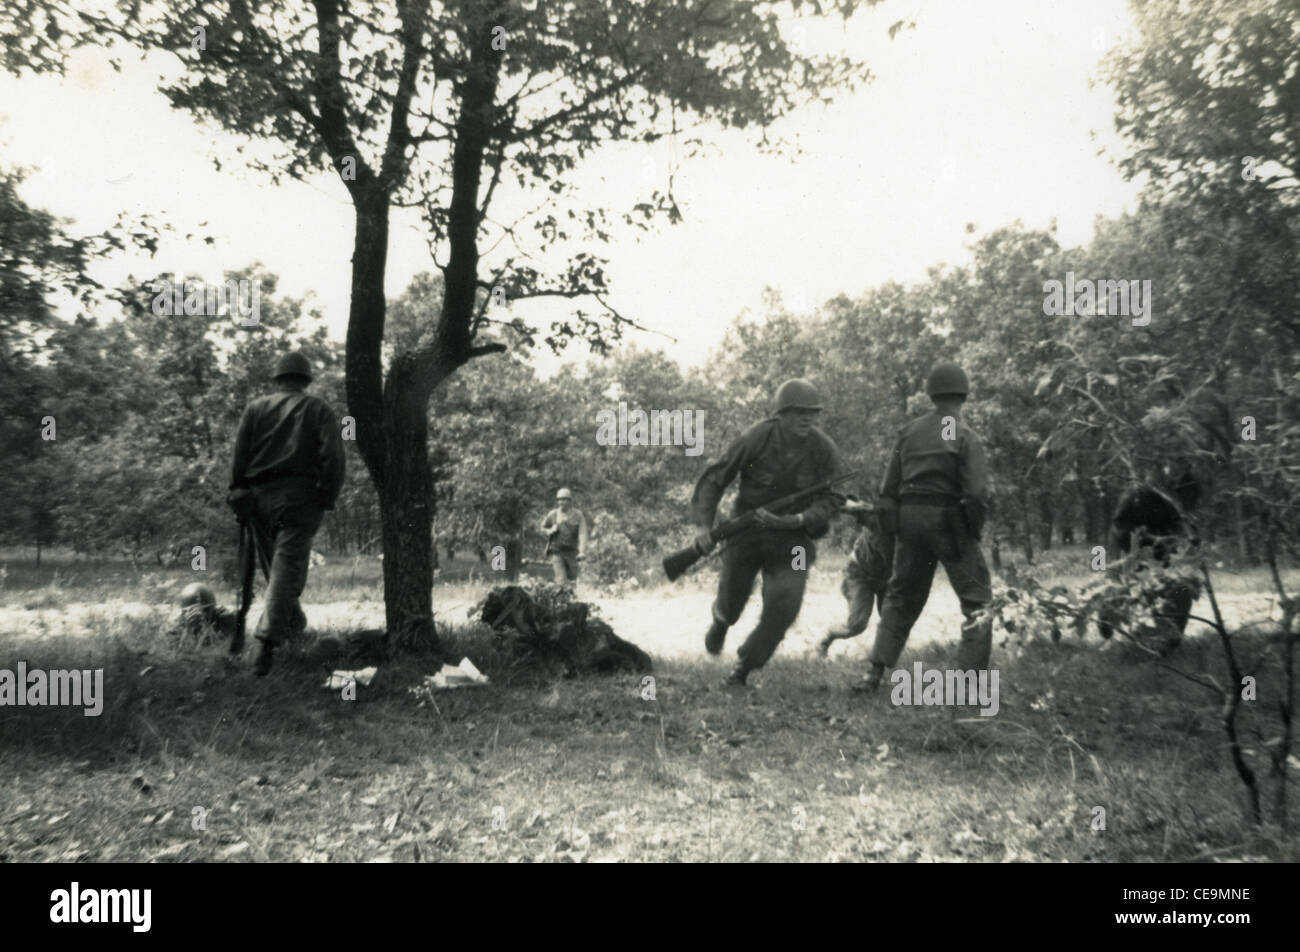 solider running with M1 Garand at Ft. Knox during the 1940s or 1950s US army training Stock Photo